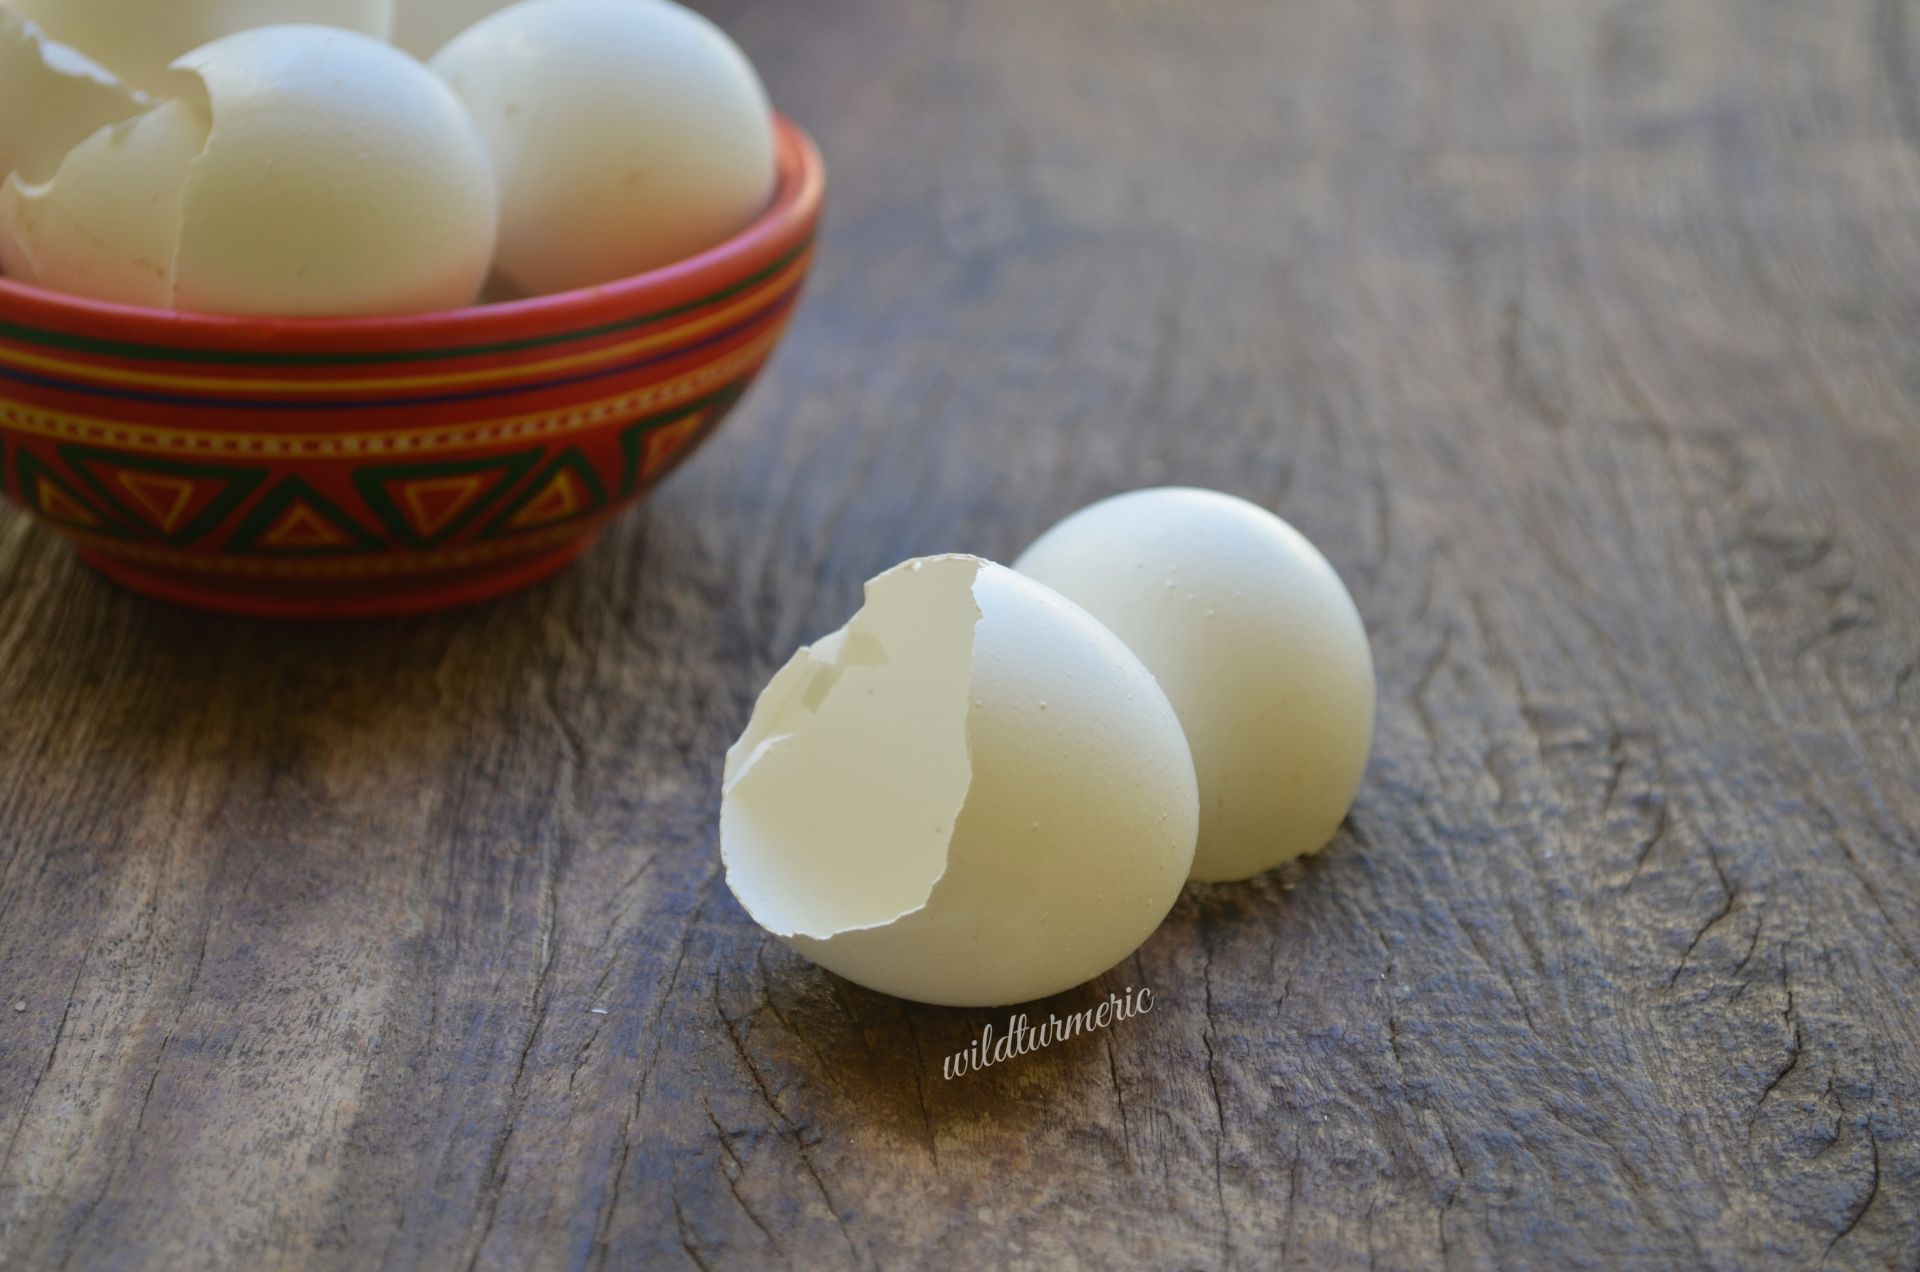 Another potential risk of eating eggshells is their sharp edges, which could cause damage to the digestive tract. To avoid this, it’s advisable to crush the eggshells into a fine powder before consuming them. This will not only make them easier to swallow but also reduce the risk of any sharp edges causing harm.